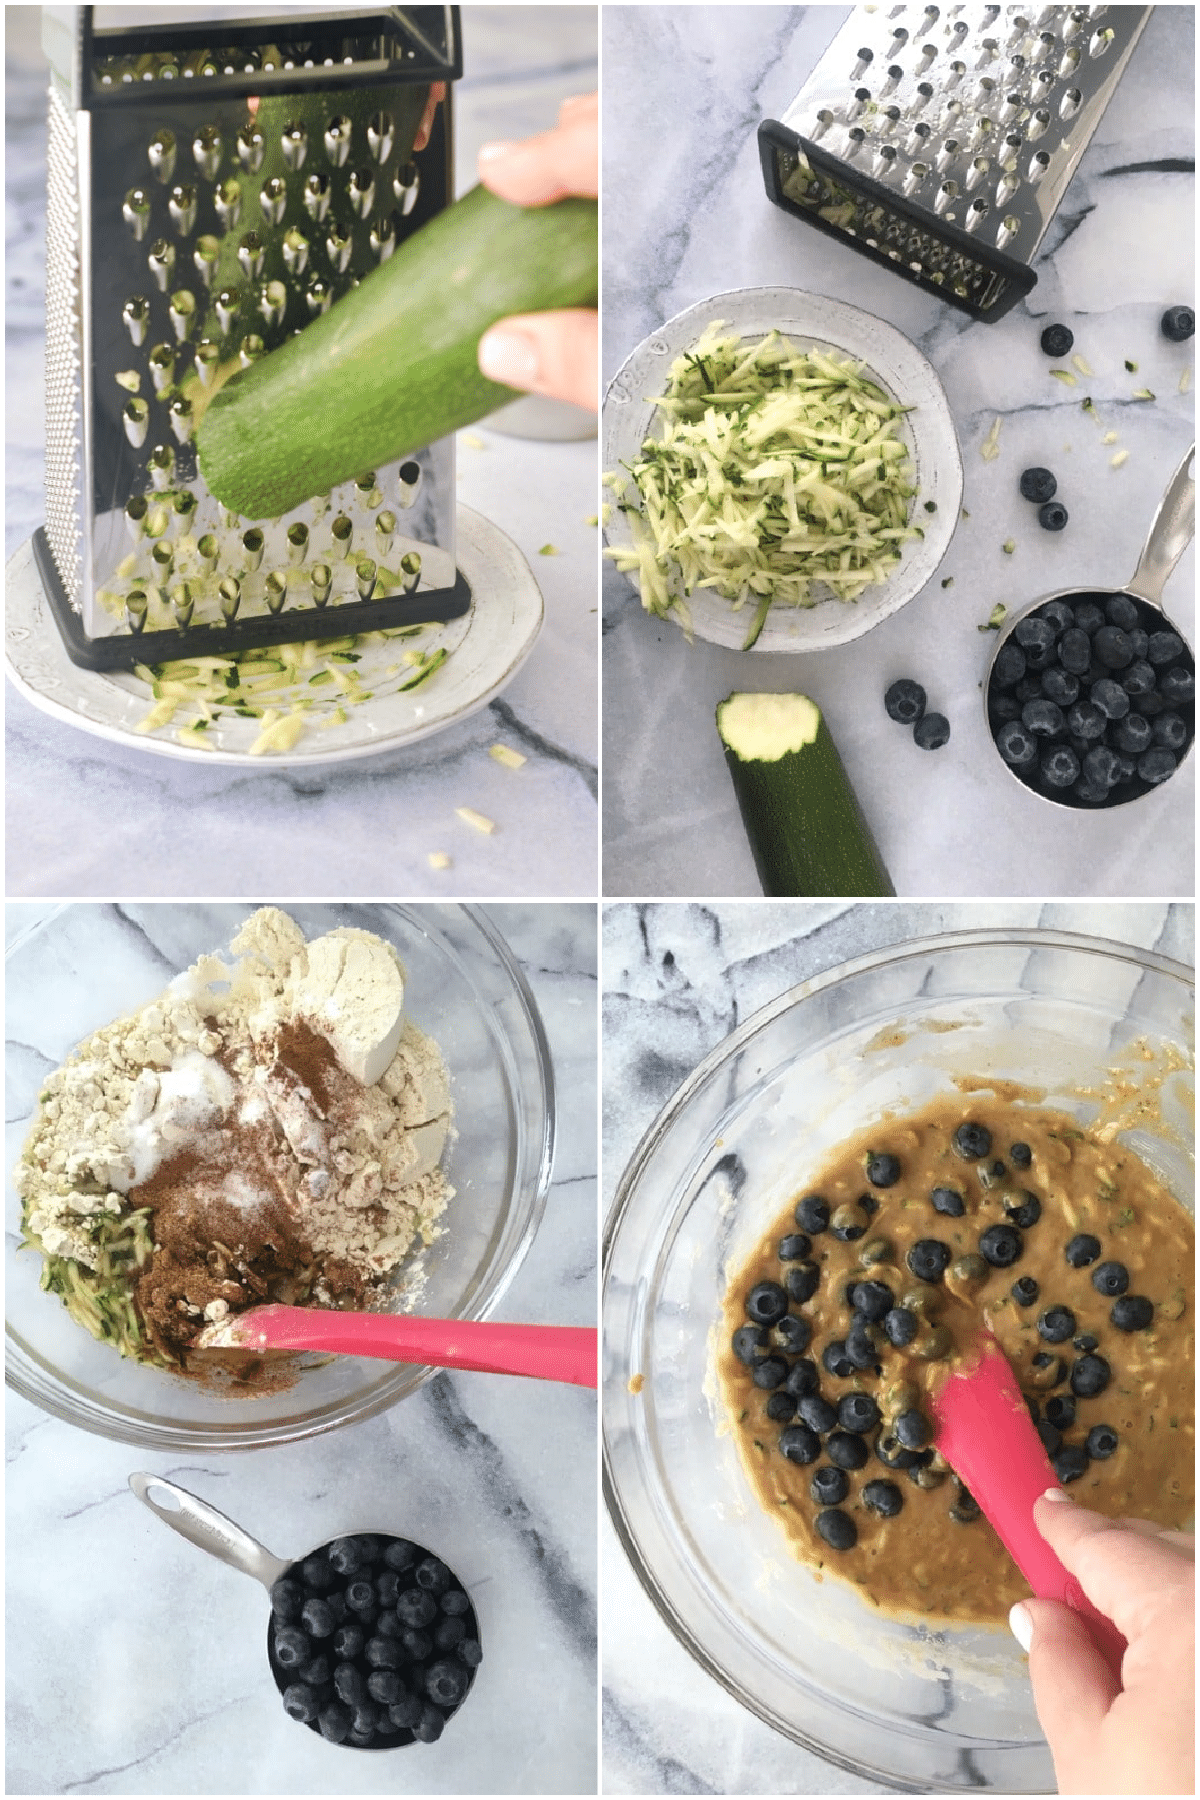 A four image collage showing how to make vegan zucchini bread: a hand grating zucchini with a box grater, a plate of grated zucchini next to a box grater and a cup of fresh blueberries, a glass mixing bowl with dry ingredients measured in, that glass mixing bowl with the fully mixed batter for zucchini bread.